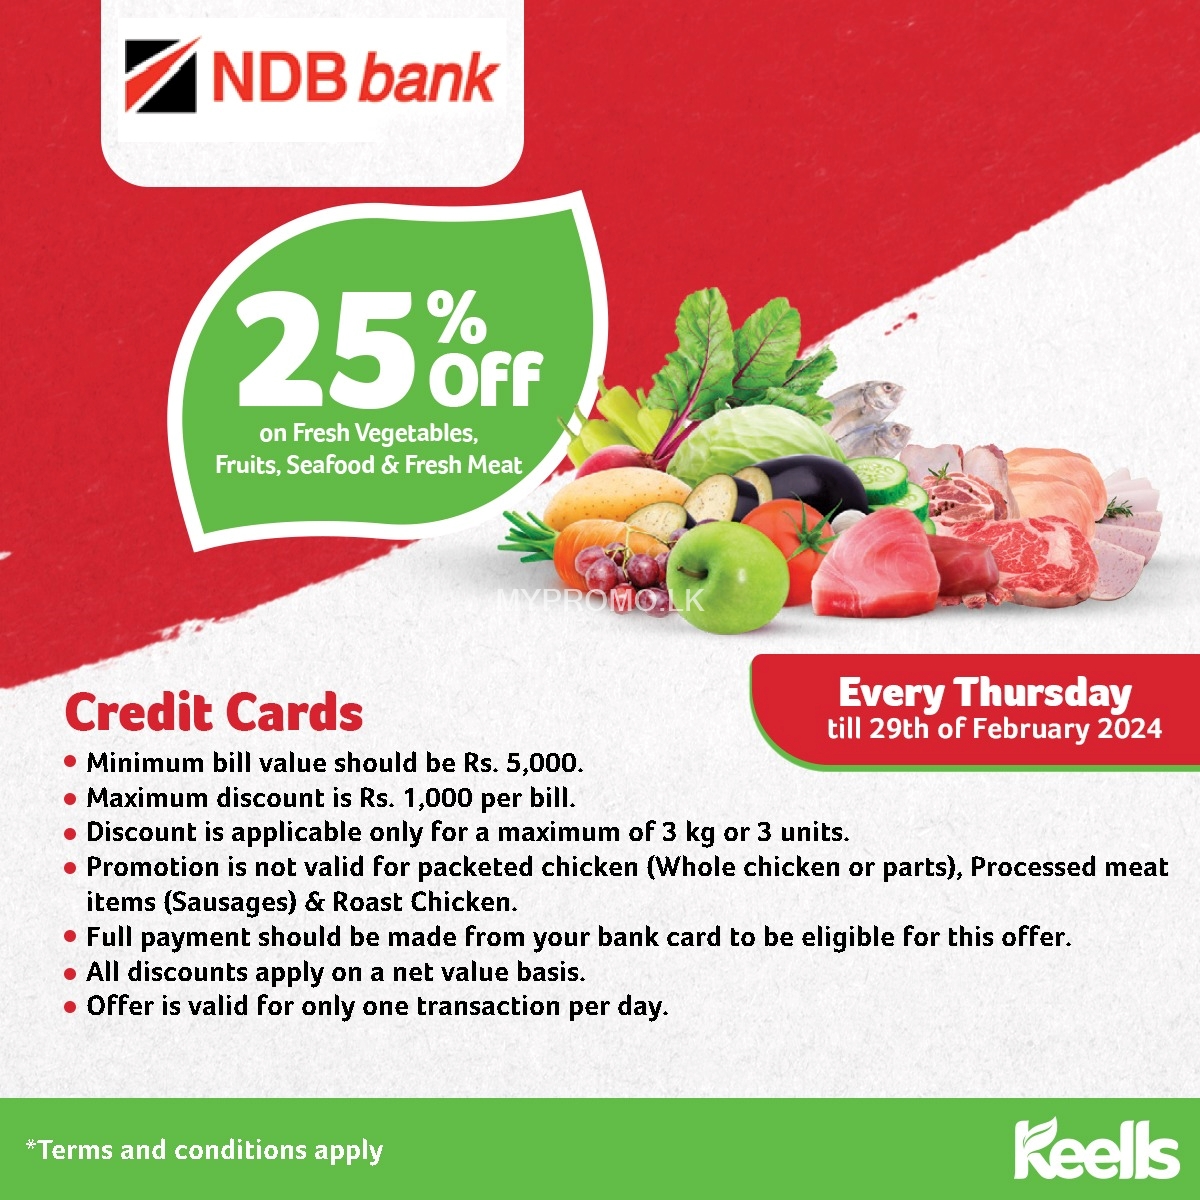 25% Off on Fresh Vegetables, Fruits, Seafood & Fresh meat at Keells for NDB Bank Credit Cards 